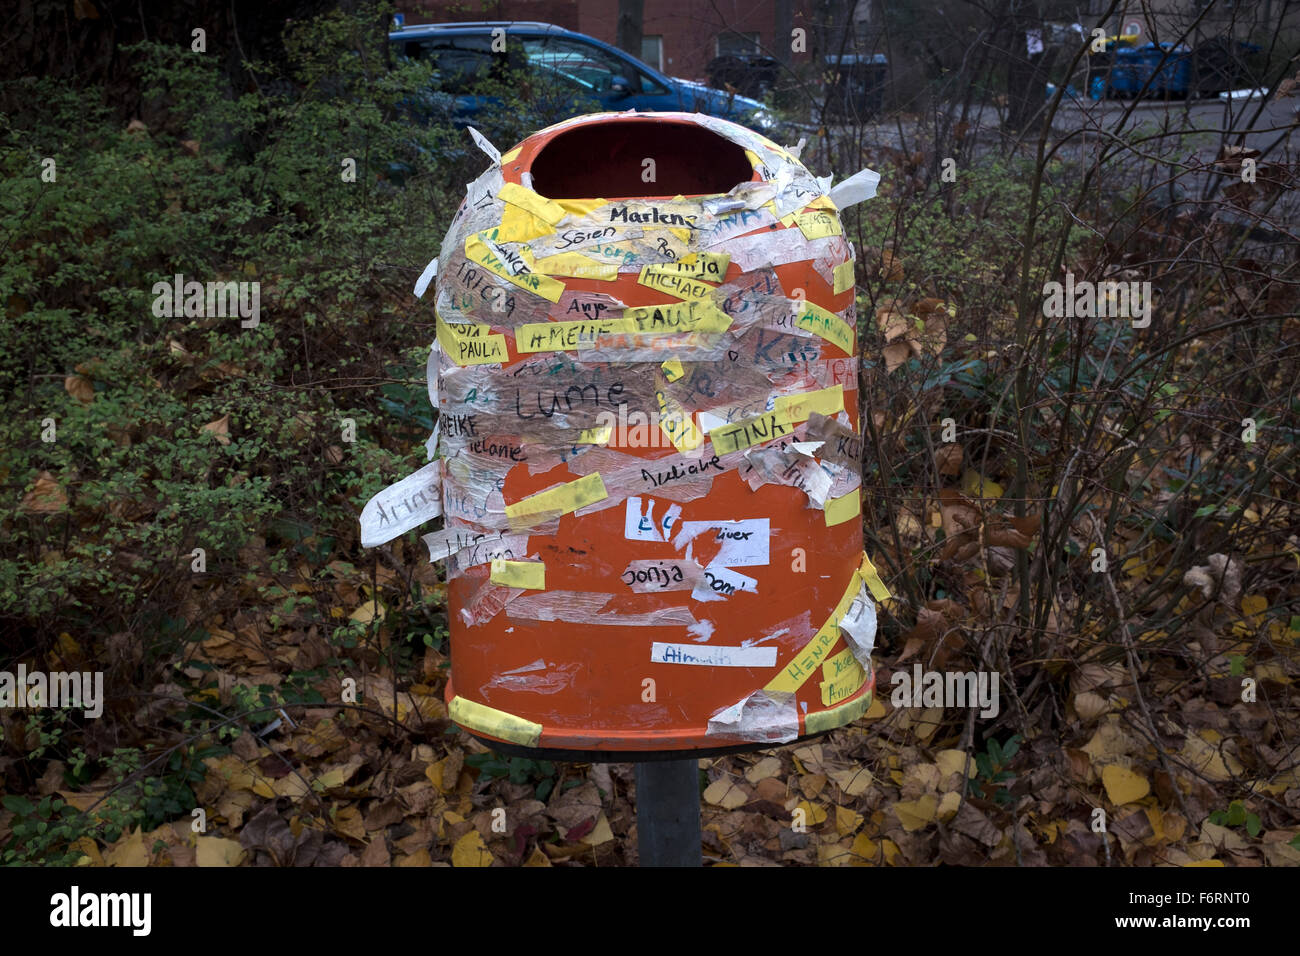 A litter bin decorated with names of volunteers working at the Landesamt für Gesundheit und Soziales (LaGeSo), the Berlin administration facility for health and social welfare, which deals with refugee registrations. The administration buildings and surrounding land became the main registration centre and first point of contact with the authorities for refugees arriving in Berlin from July 2015 onwards. Around 60 refugees arrived in the city in the first 10 months of 2015, out of an overall total of around 850,000 in the whole of Germany. Stock Photo